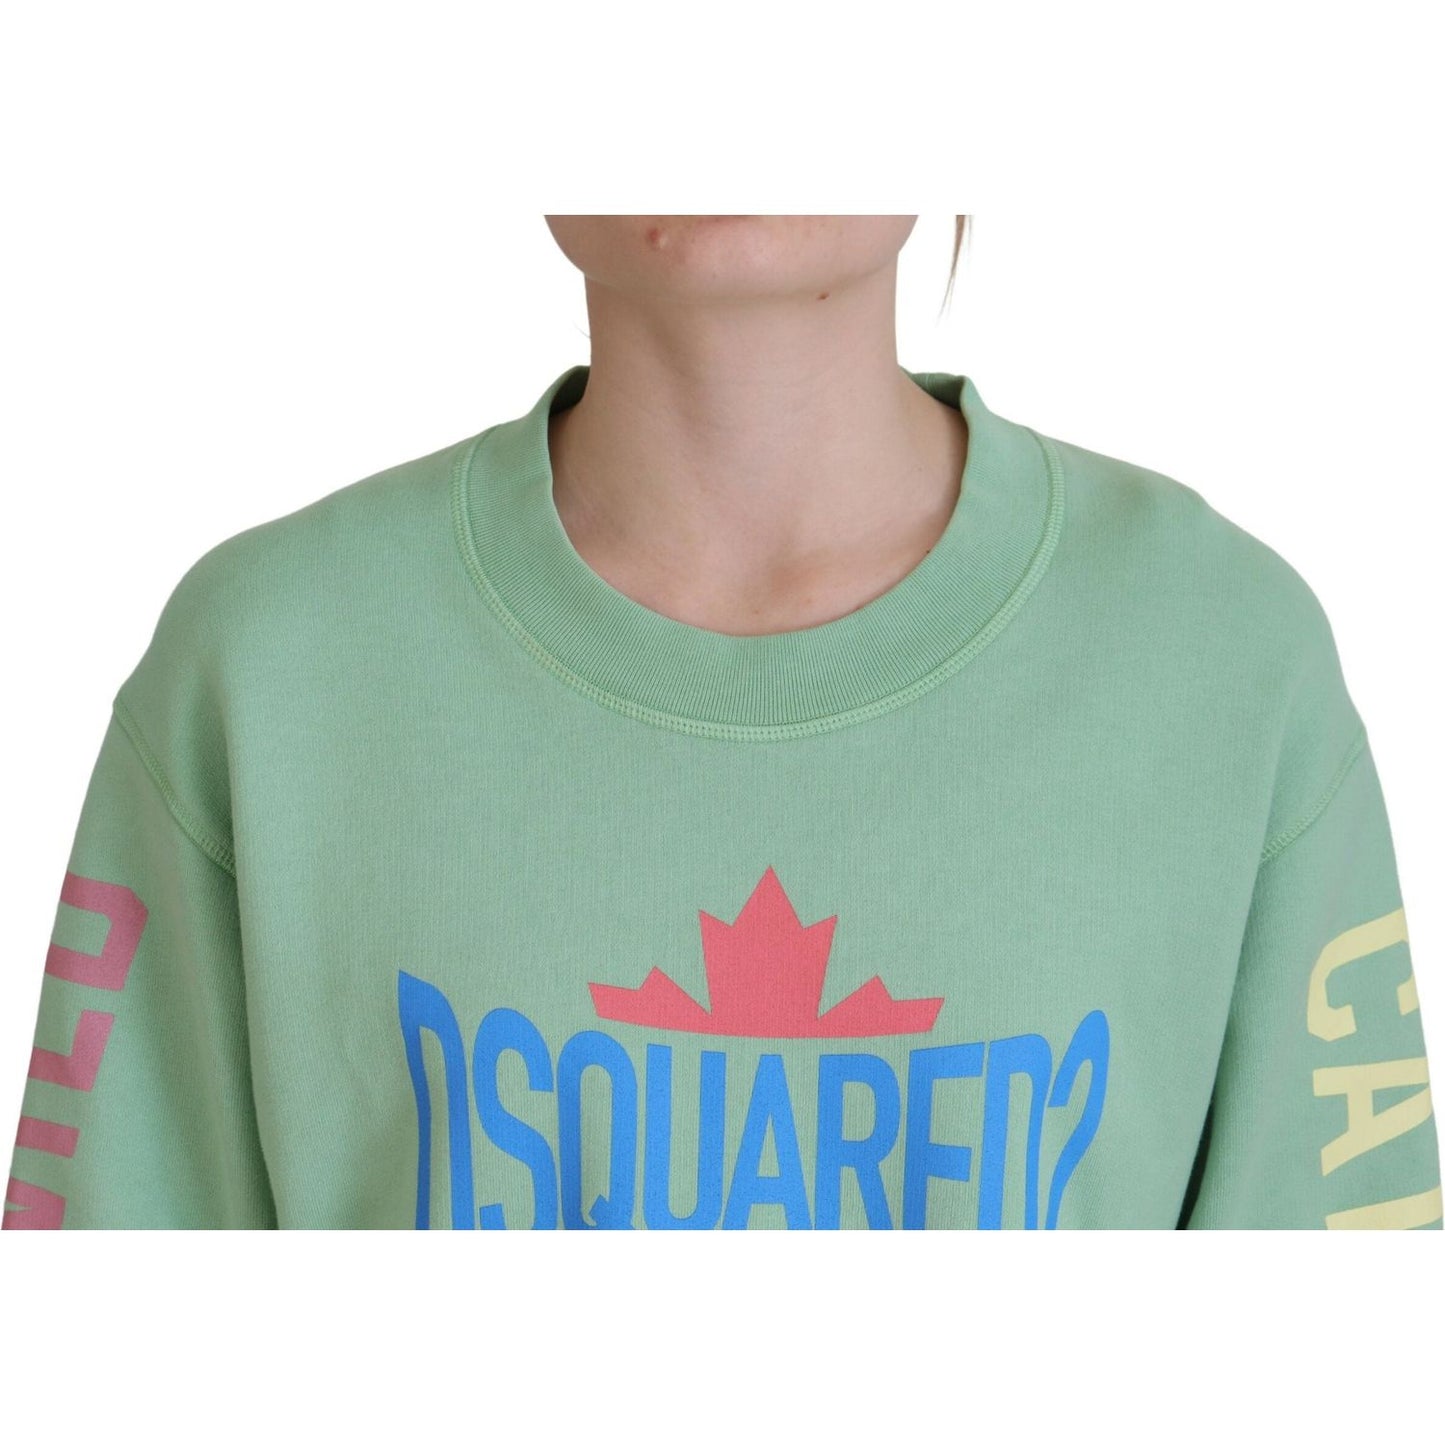 Dsquared² Green Logo Printed Crew Neck Long Sleeve Sweater green-logo-printed-crew-neck-long-sleeve-sweater